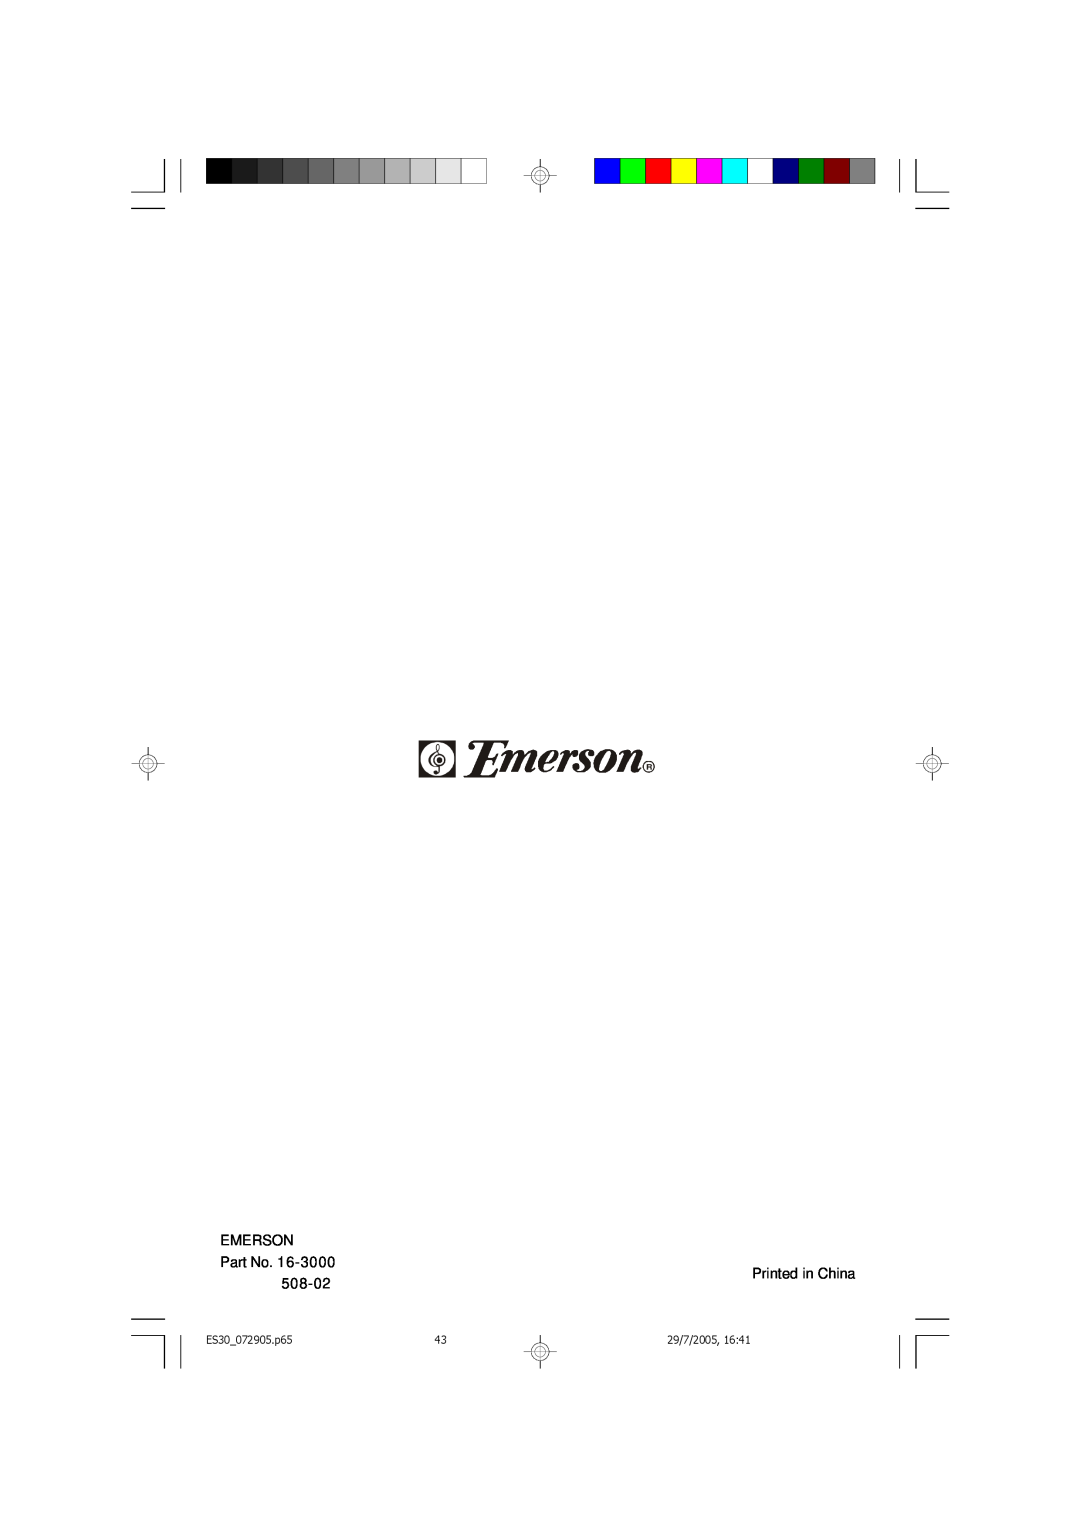 Emerson Process Management owner manual EMERSON Part No, 508-02, Printed in China, ES30_072905.p65, 29/7/2005, 16:41 